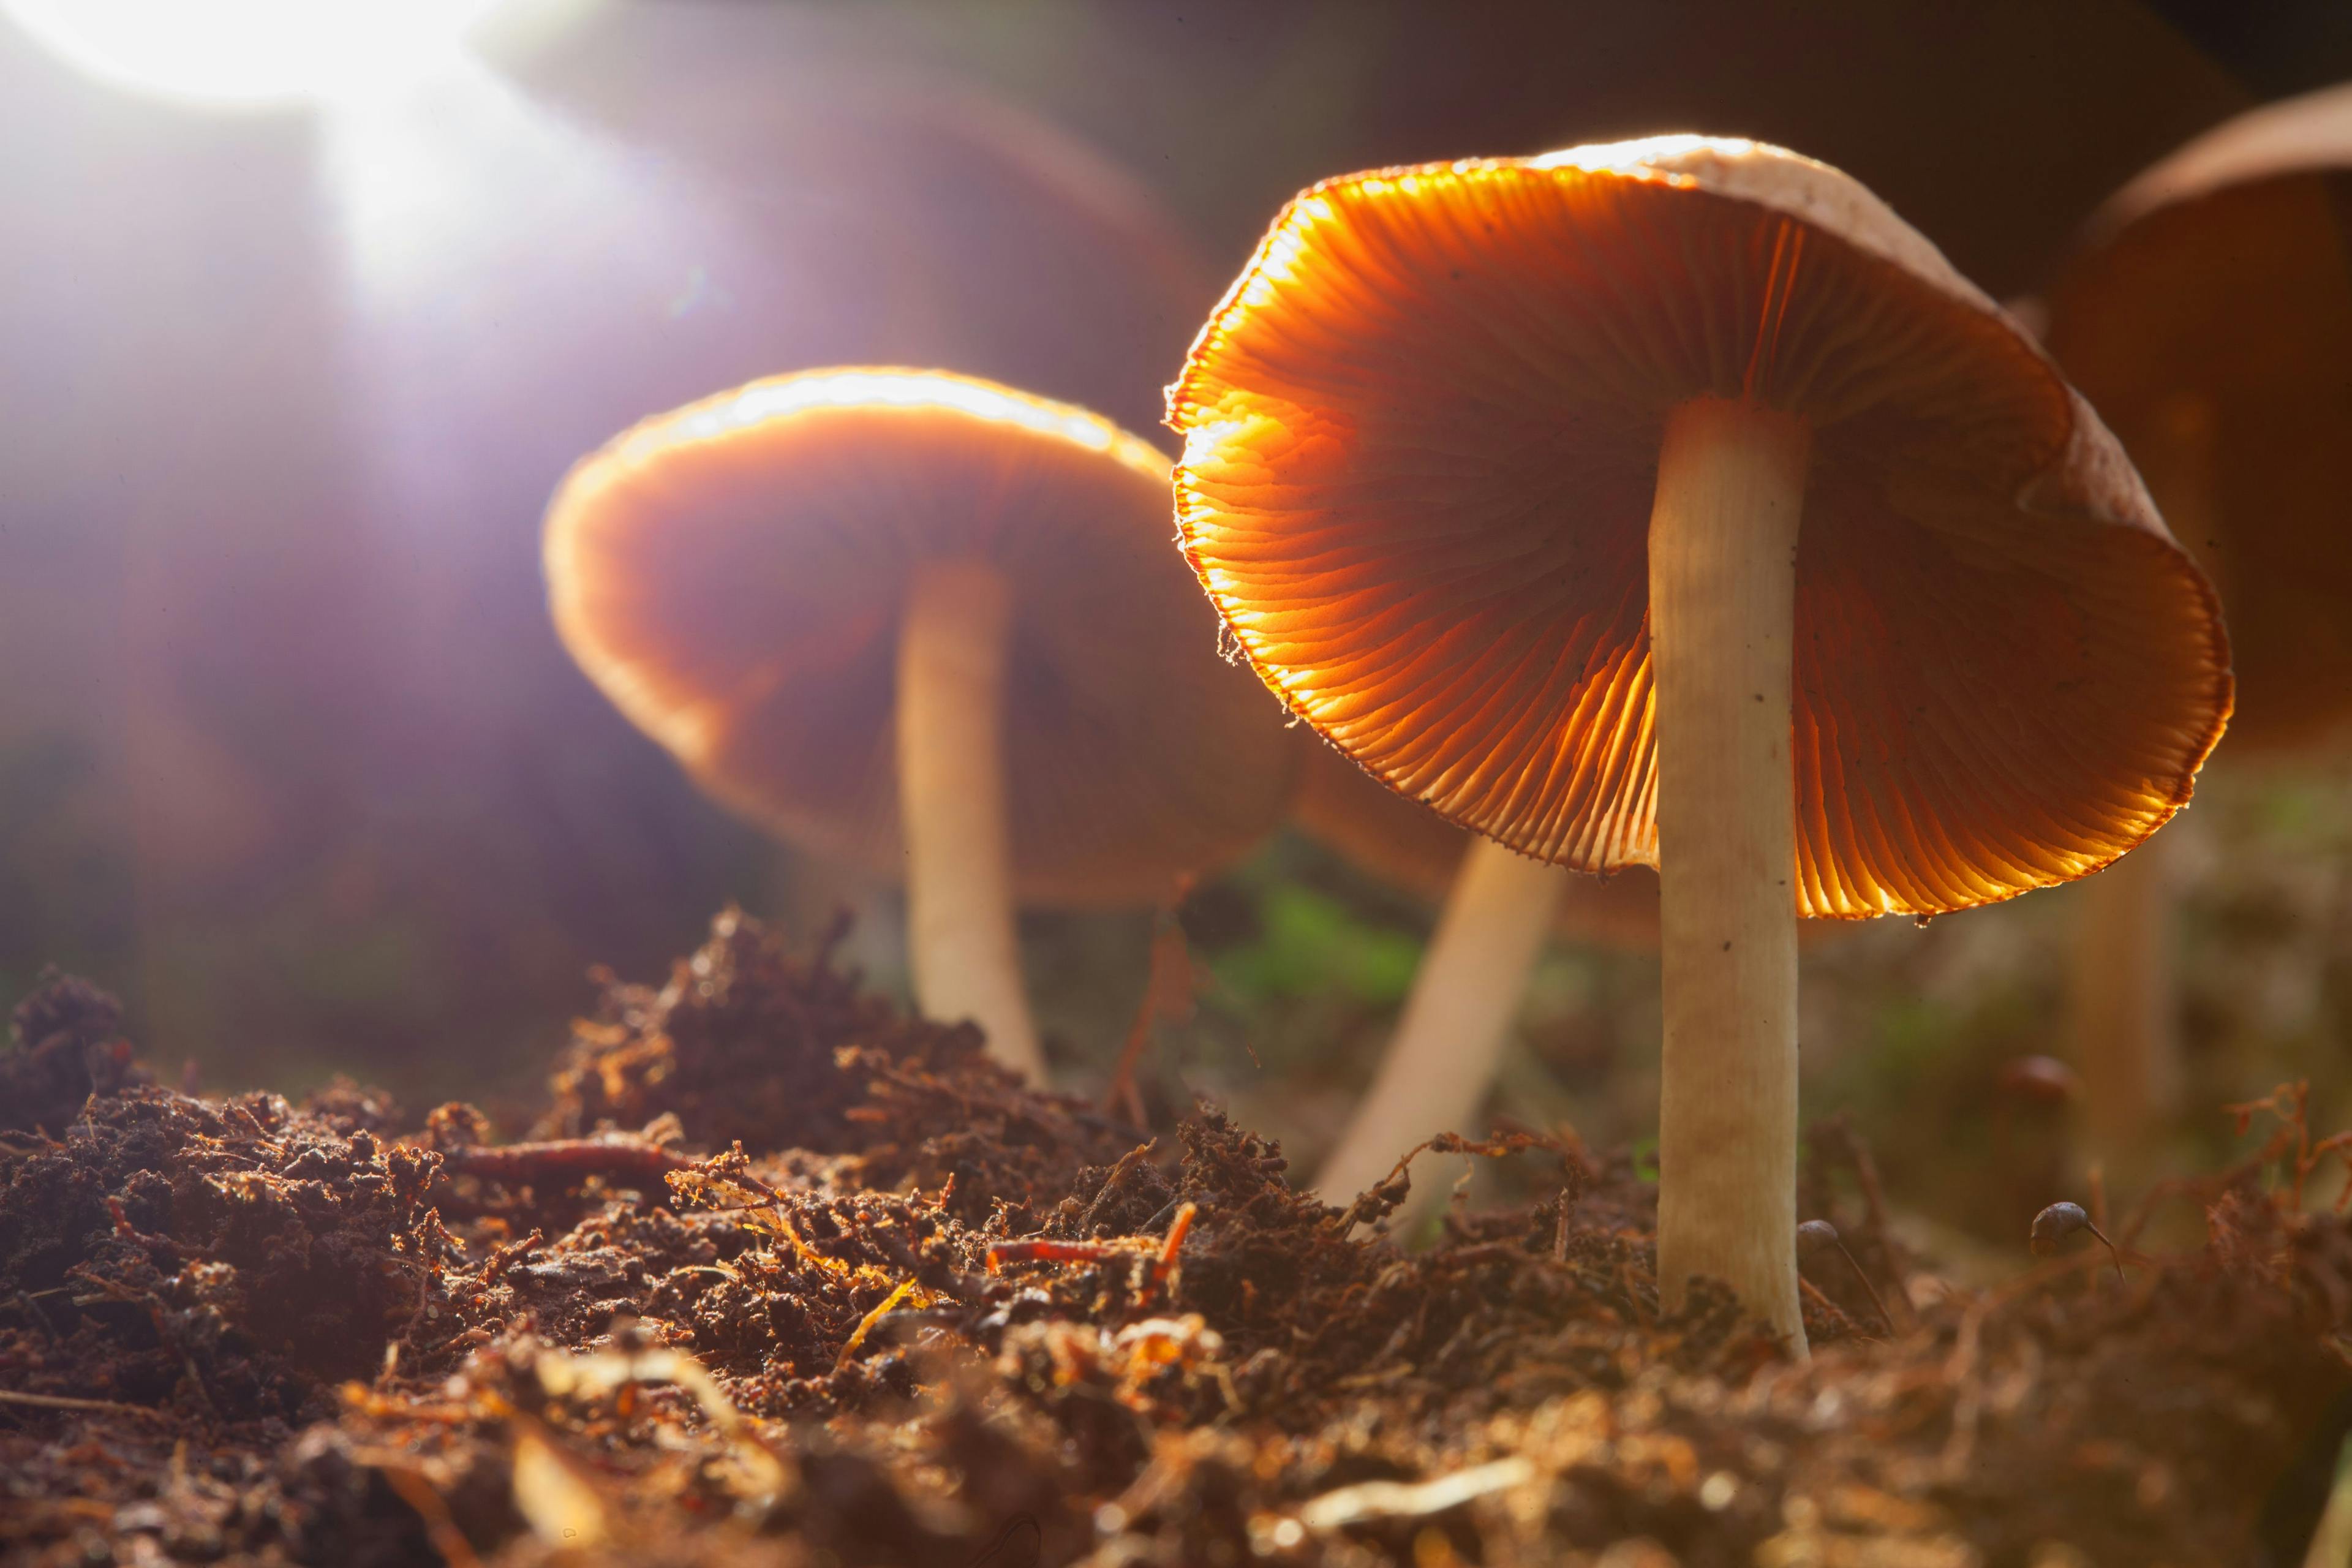 Psychedelic Therapeutics: Education, Advocacy Key to Overcoming Integration Hurdles